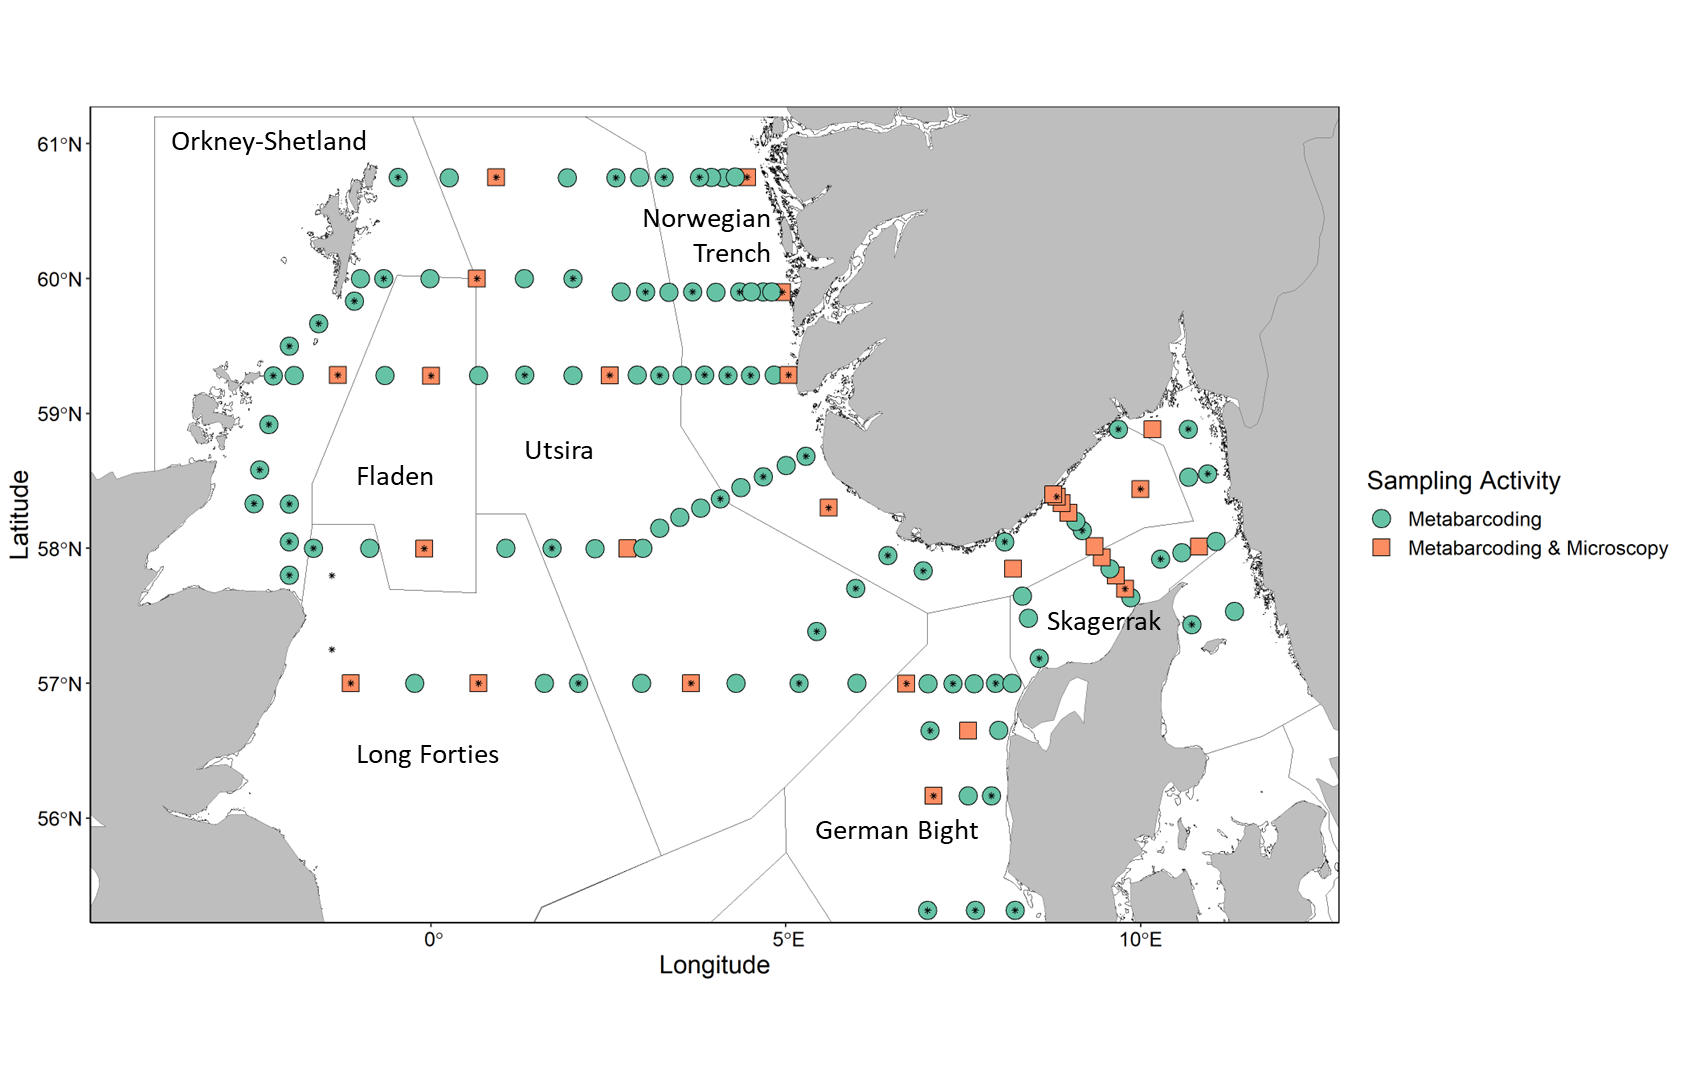 Figure 2. Map showing stations where phytoplankton samples were collected and analyzed. Shapes indicate sampling activities at a given station: circle- metabarcoding sample collection, square- microscopy sample analysis and metabarcoding sample collection, star: algae net sample collection. Outlined and labeled areas indicate WGINOSE sub-regions. 